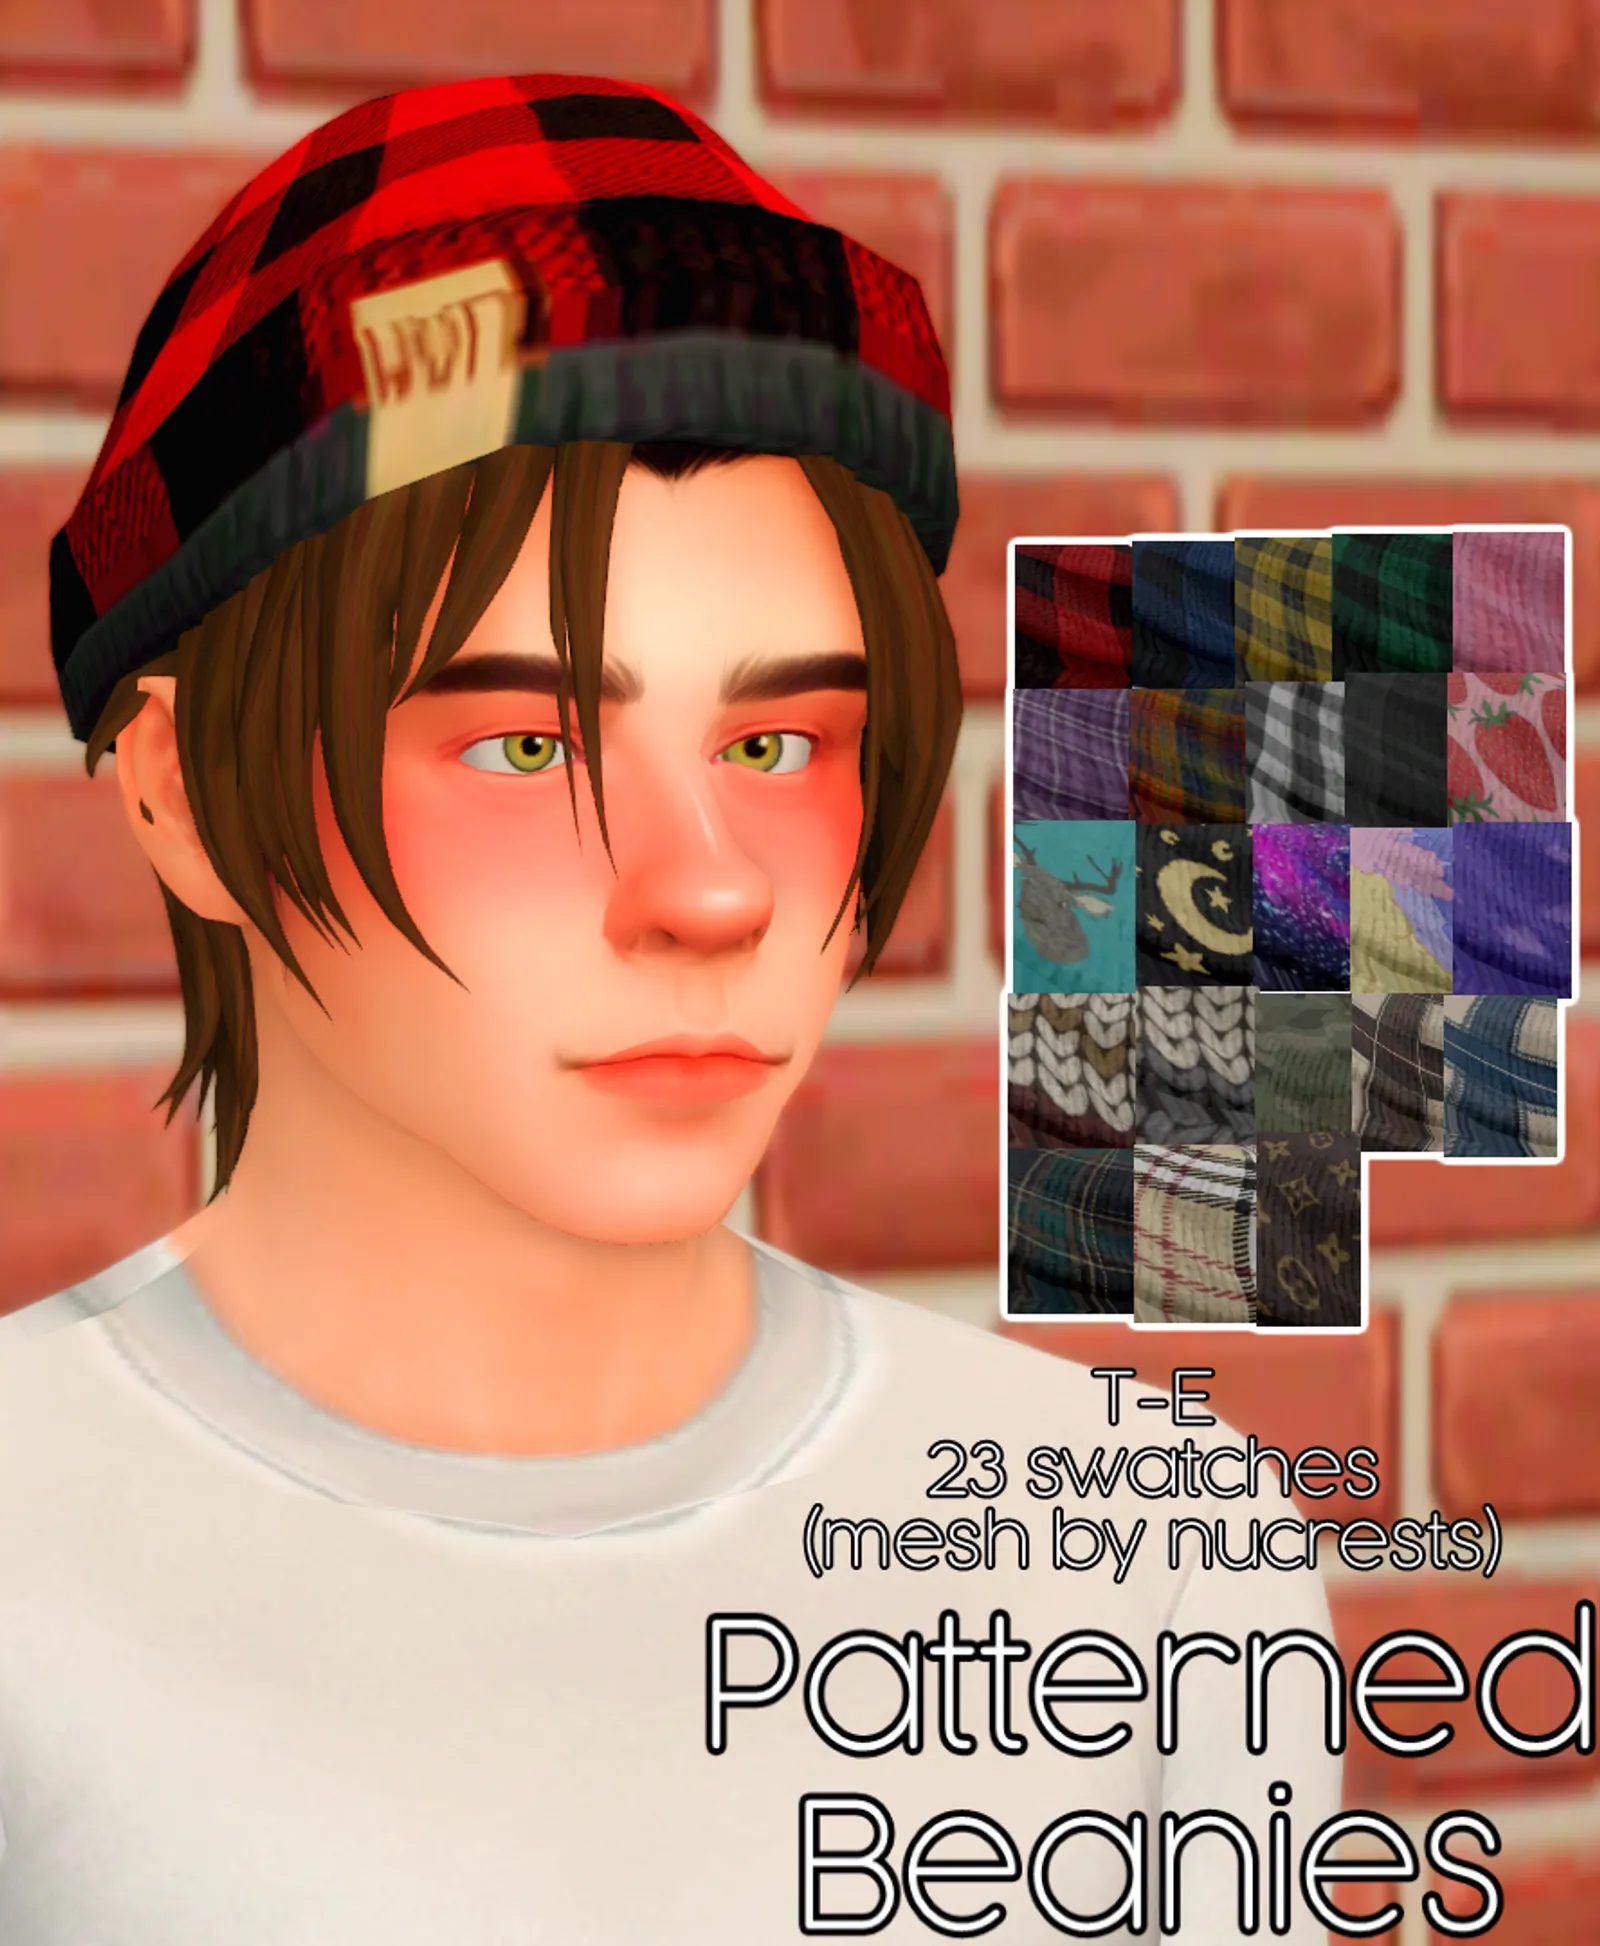 Patterned Beanies